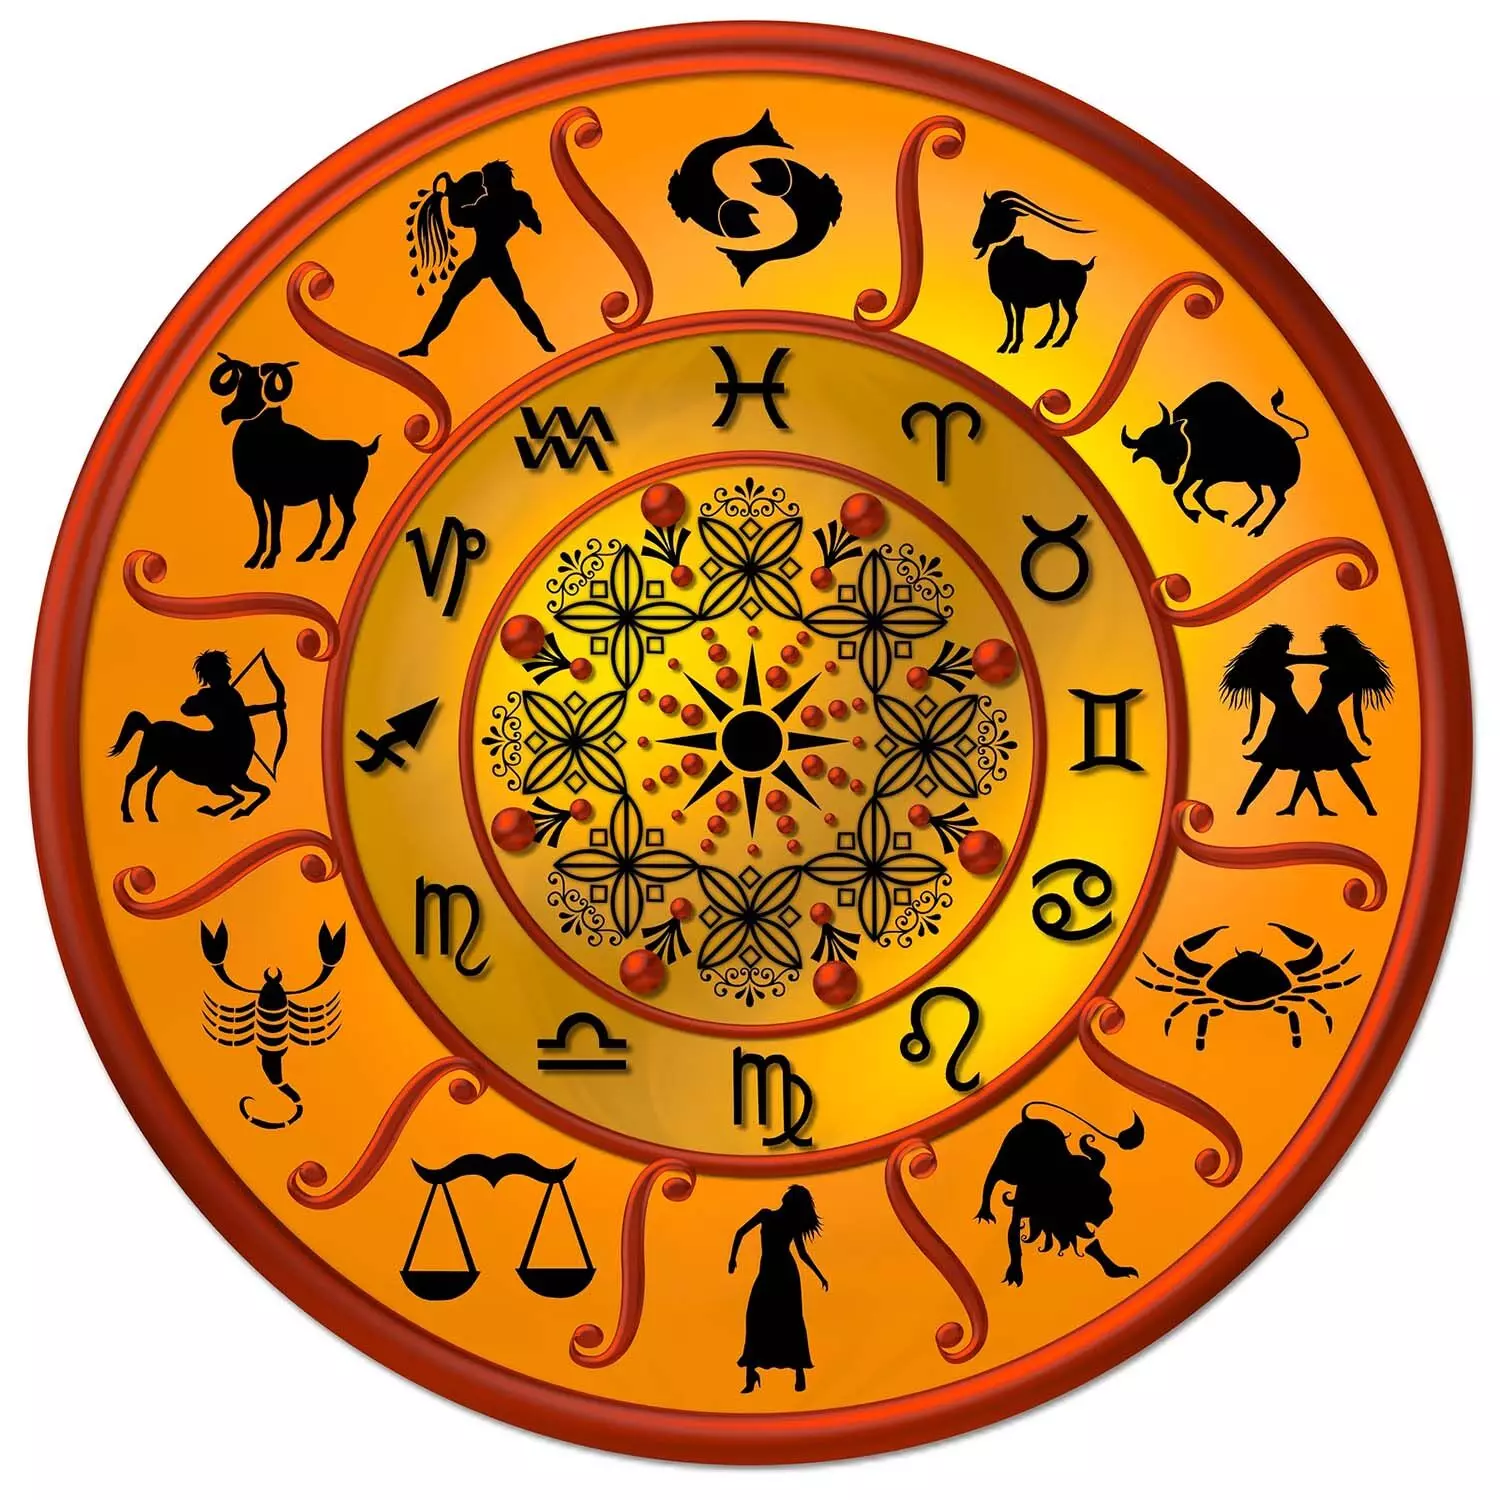 22 June – Know your todays horoscope